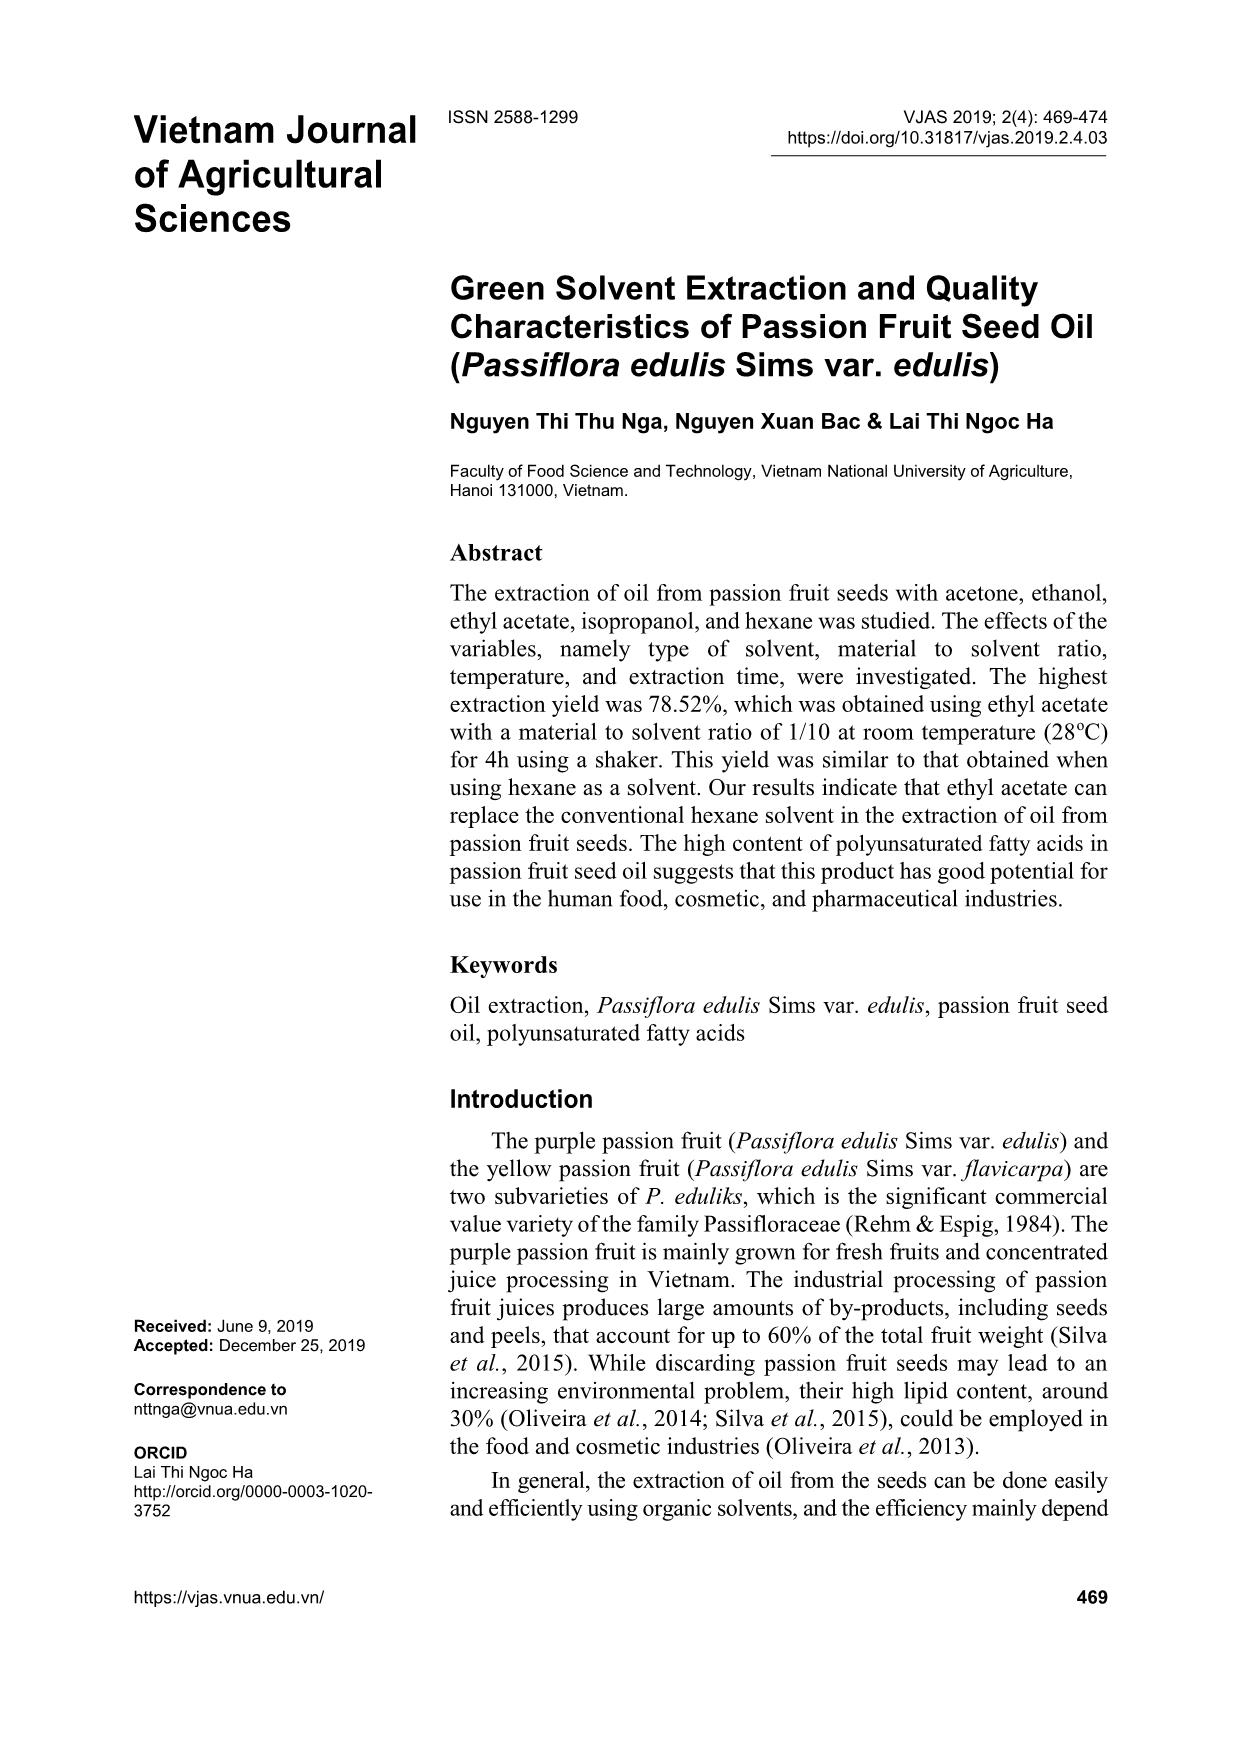 Green solvent extraction and quality characteristics of passion fruit seed oil (Passiflora edulis Sims var. edulis) trang 1